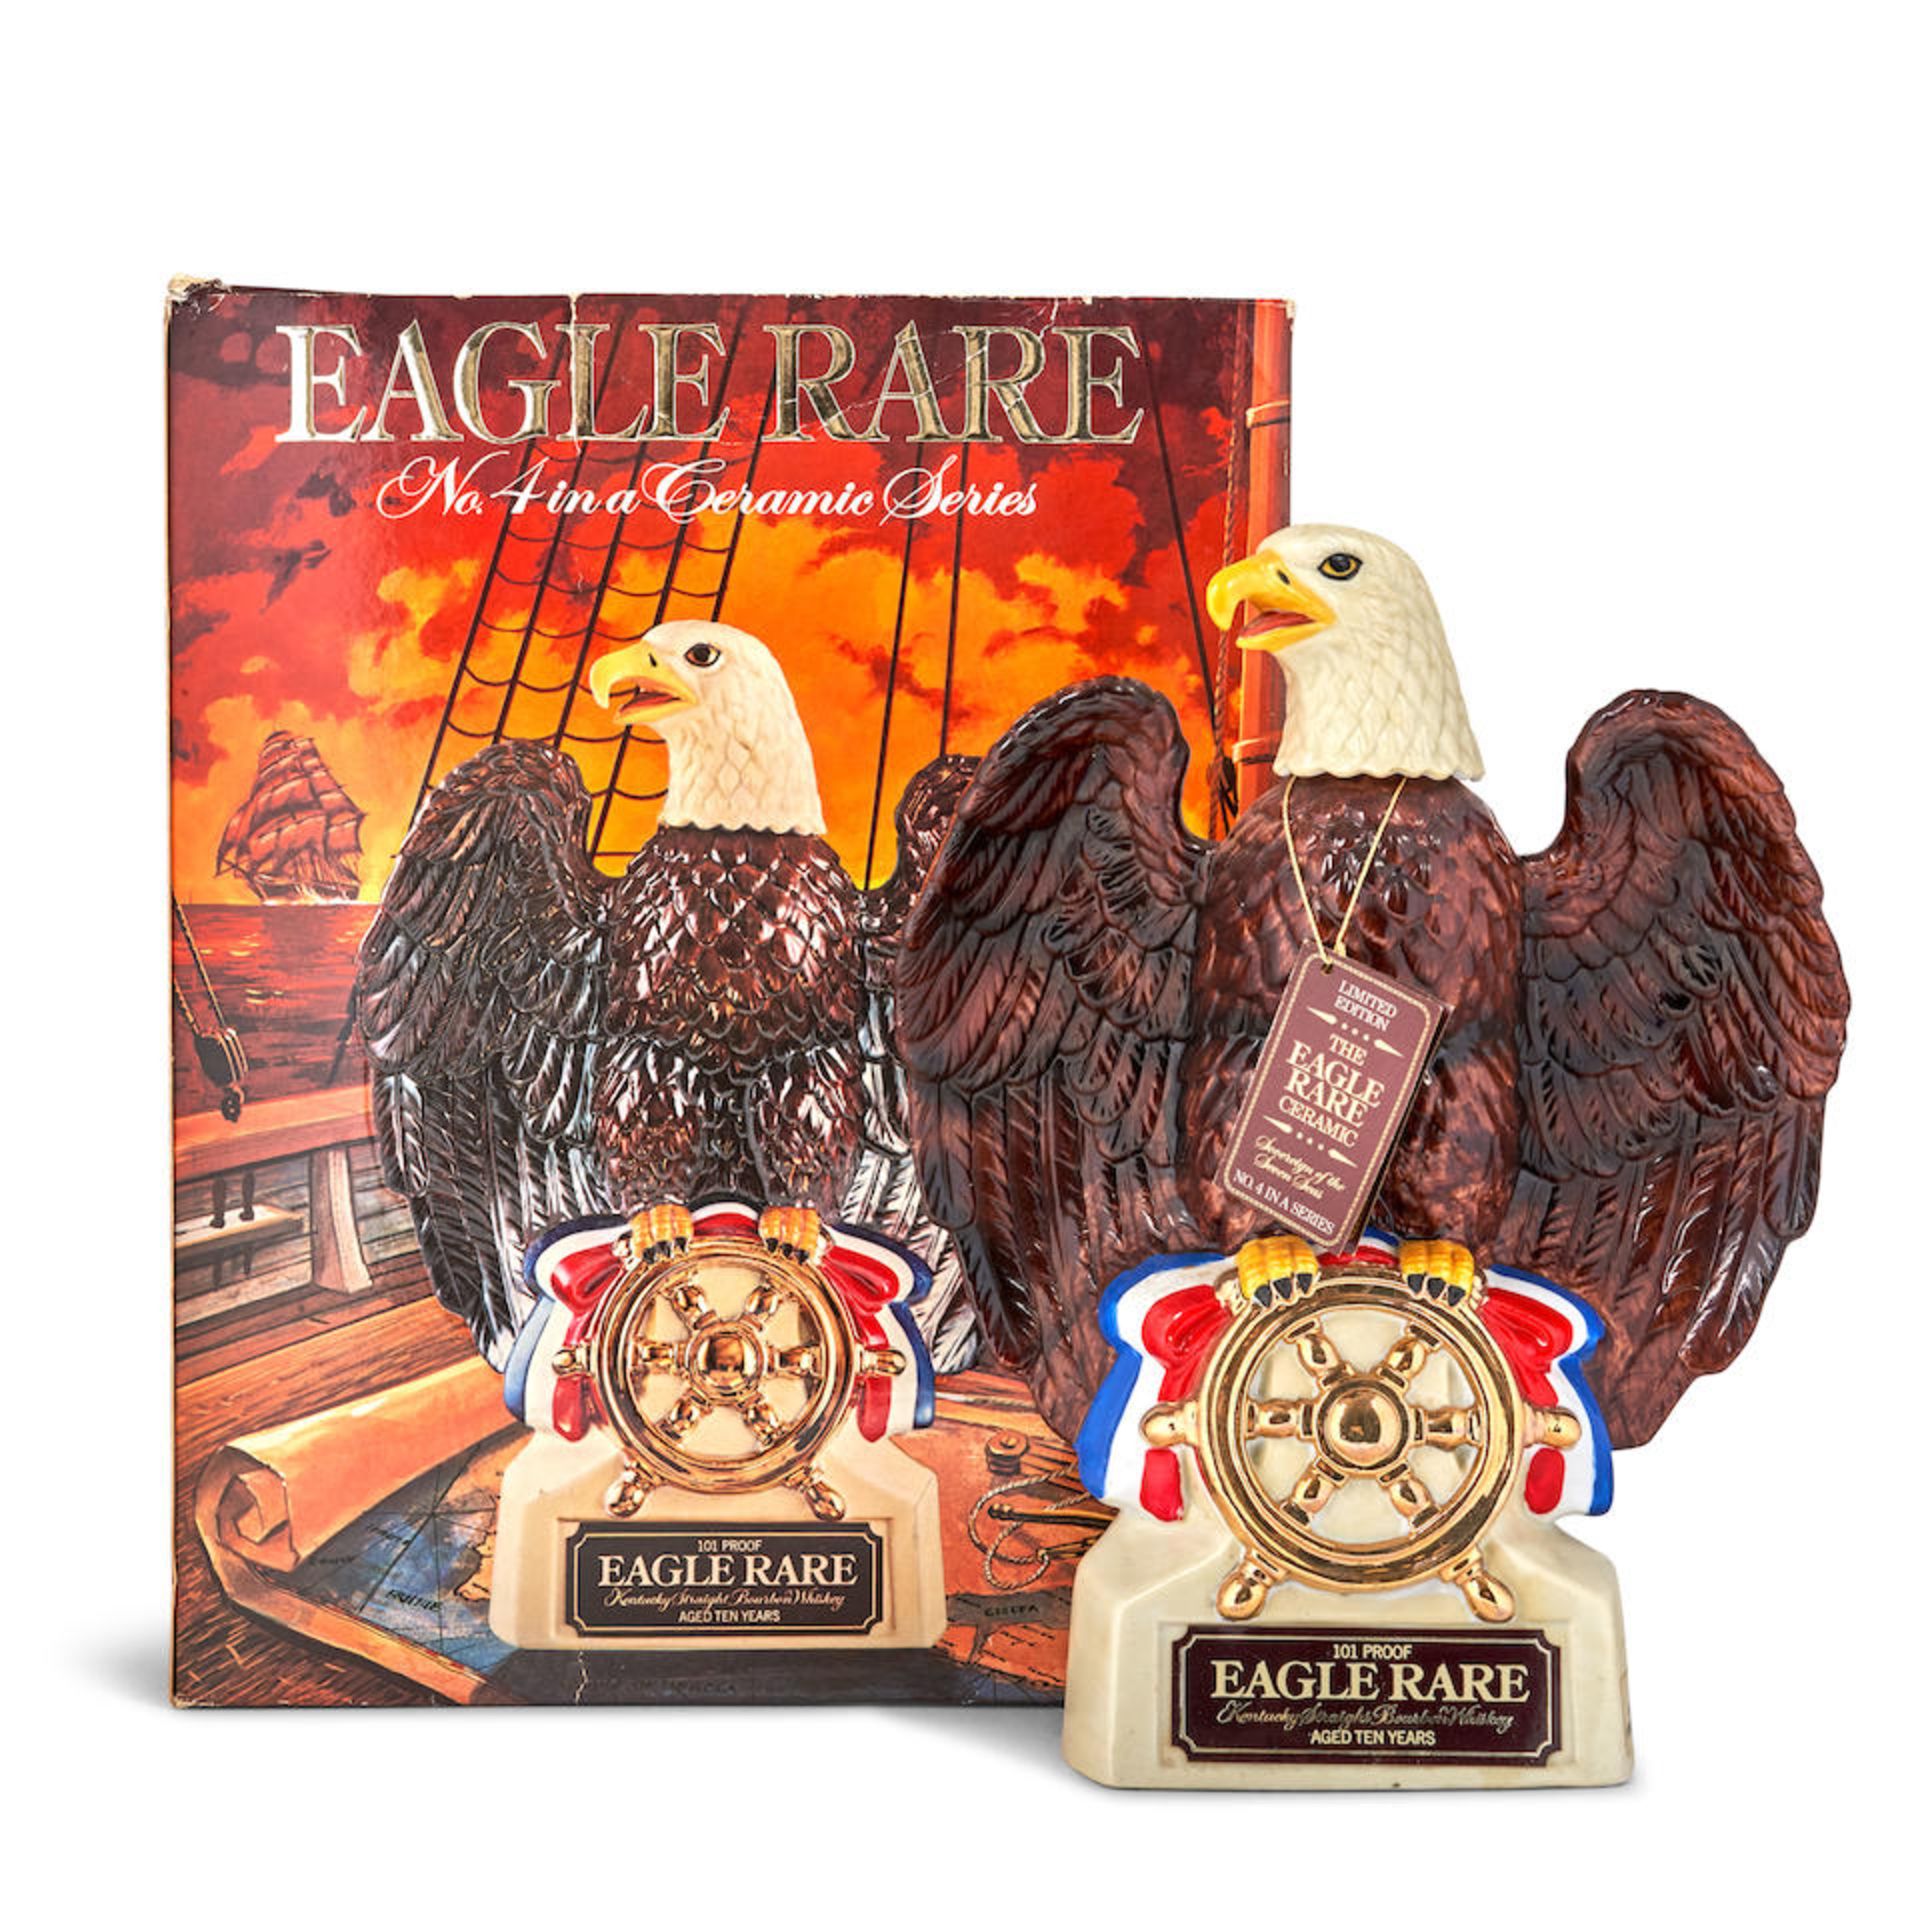 Eagle Rare 10 Years Old Decanter 1982 (1 750ml bottle)